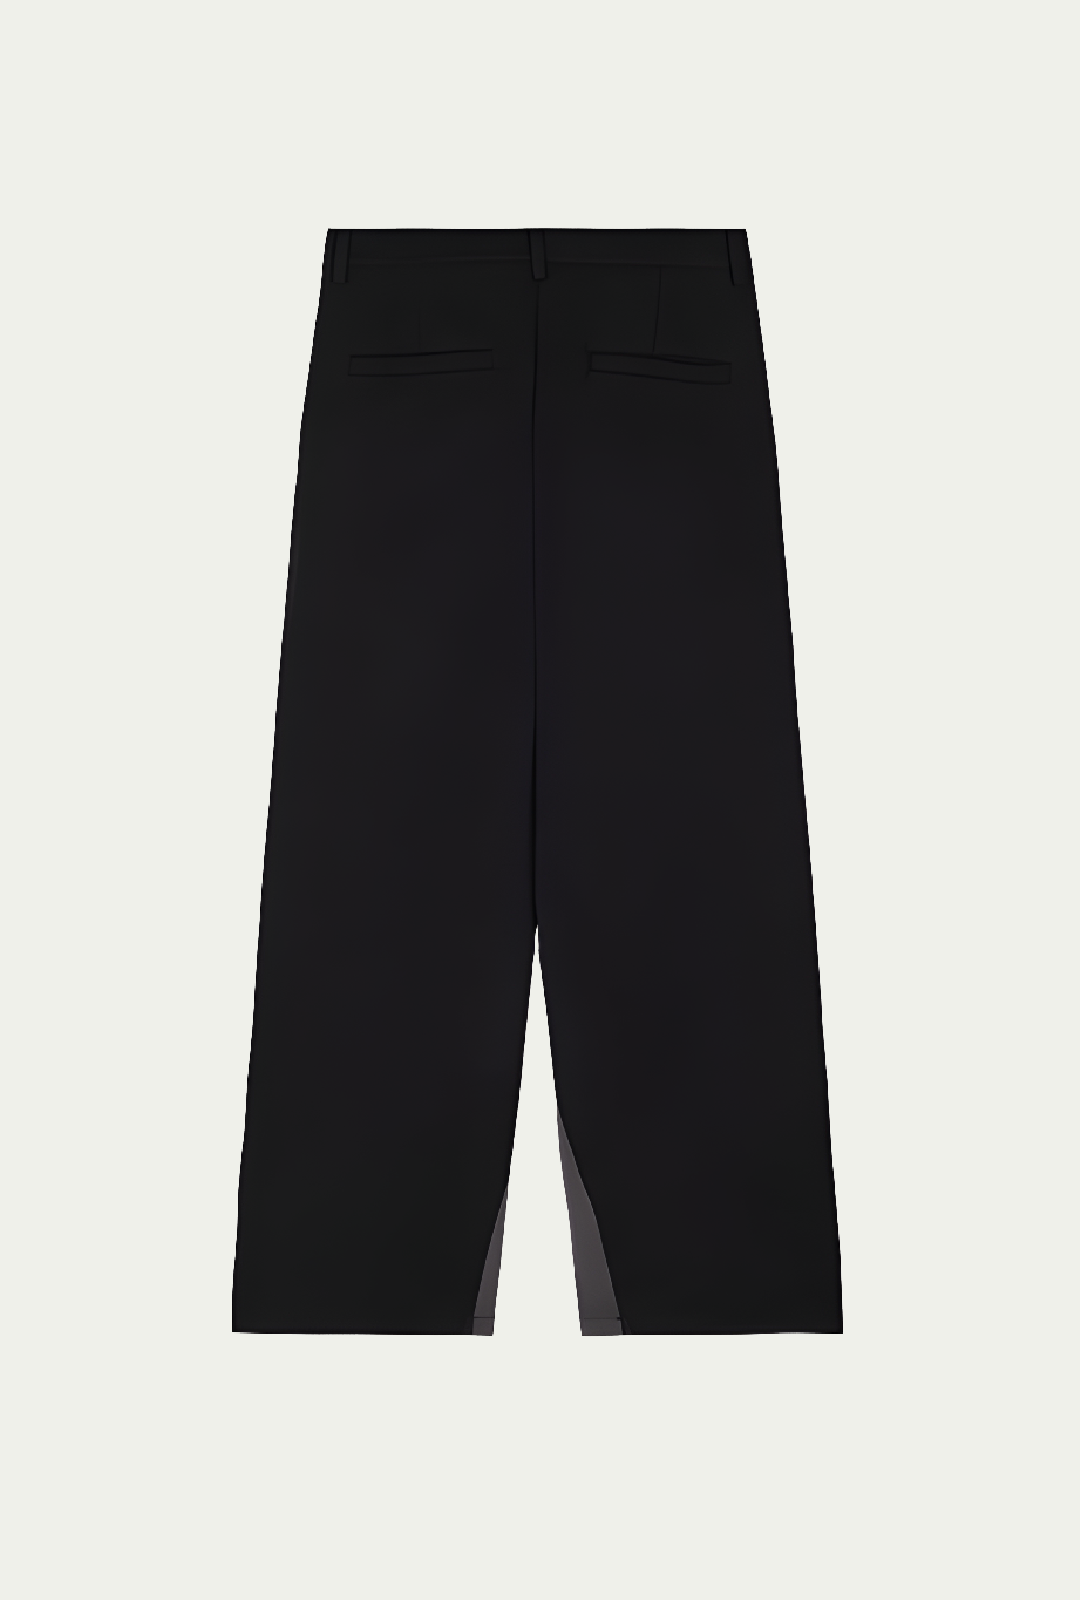 Everest Trousers